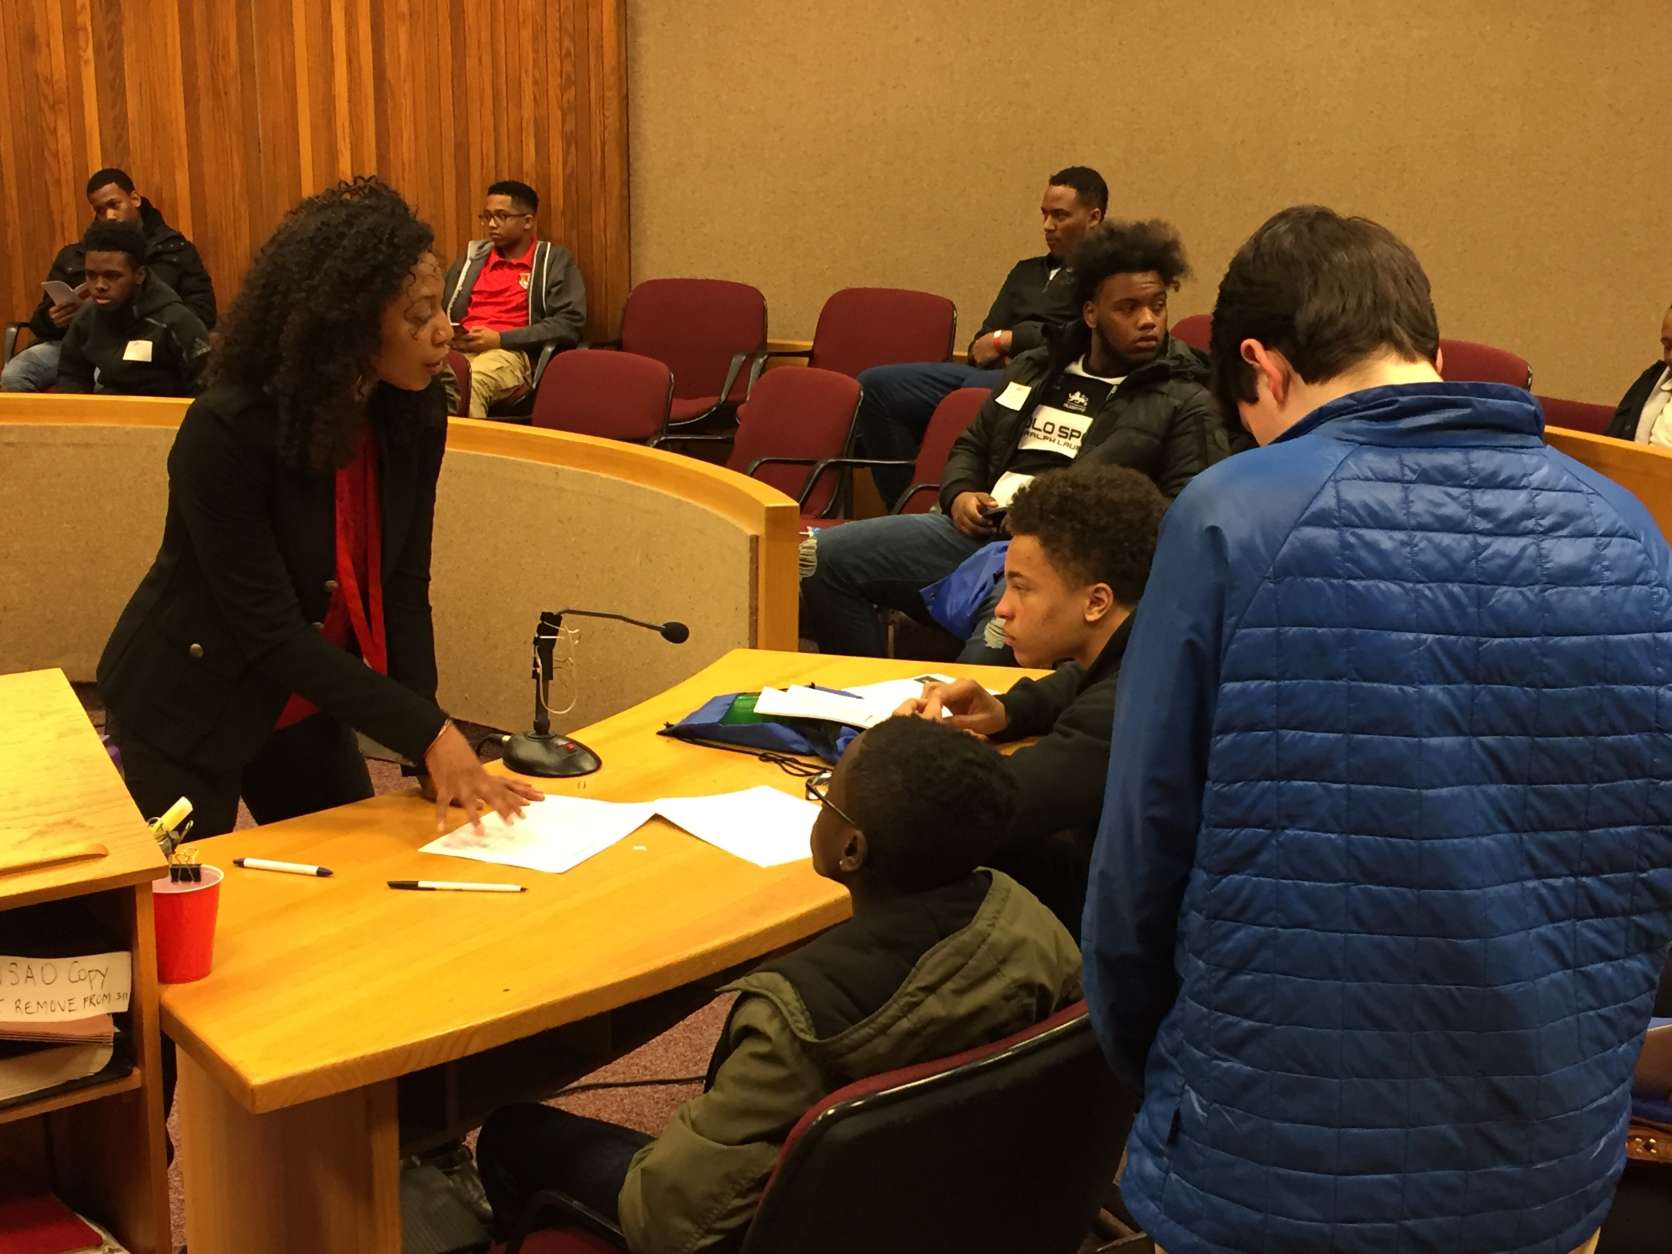 Through the DC Youth Law Fair students explored serving as judges, jury members and attorneys as they worked on a mock case that involved a 15-year-old girl who sent intimate photos of herself to her 18-year-old boyfriend. (WTOP/John Domen) 